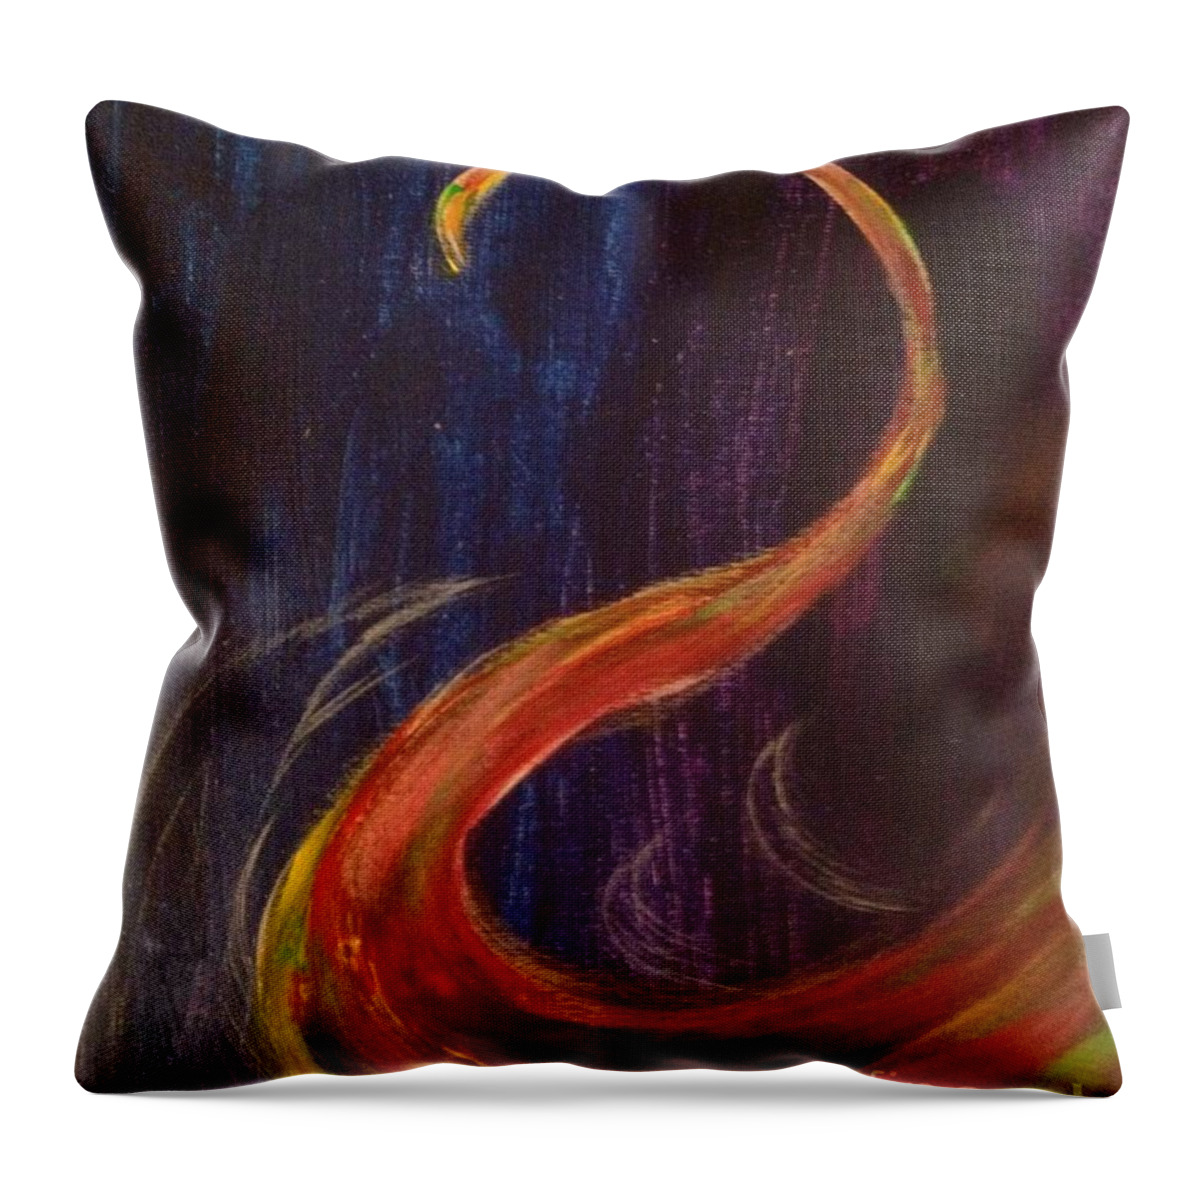 Bright Swan Throw Pillow featuring the painting Bright Swan by Sarahleah Hankes